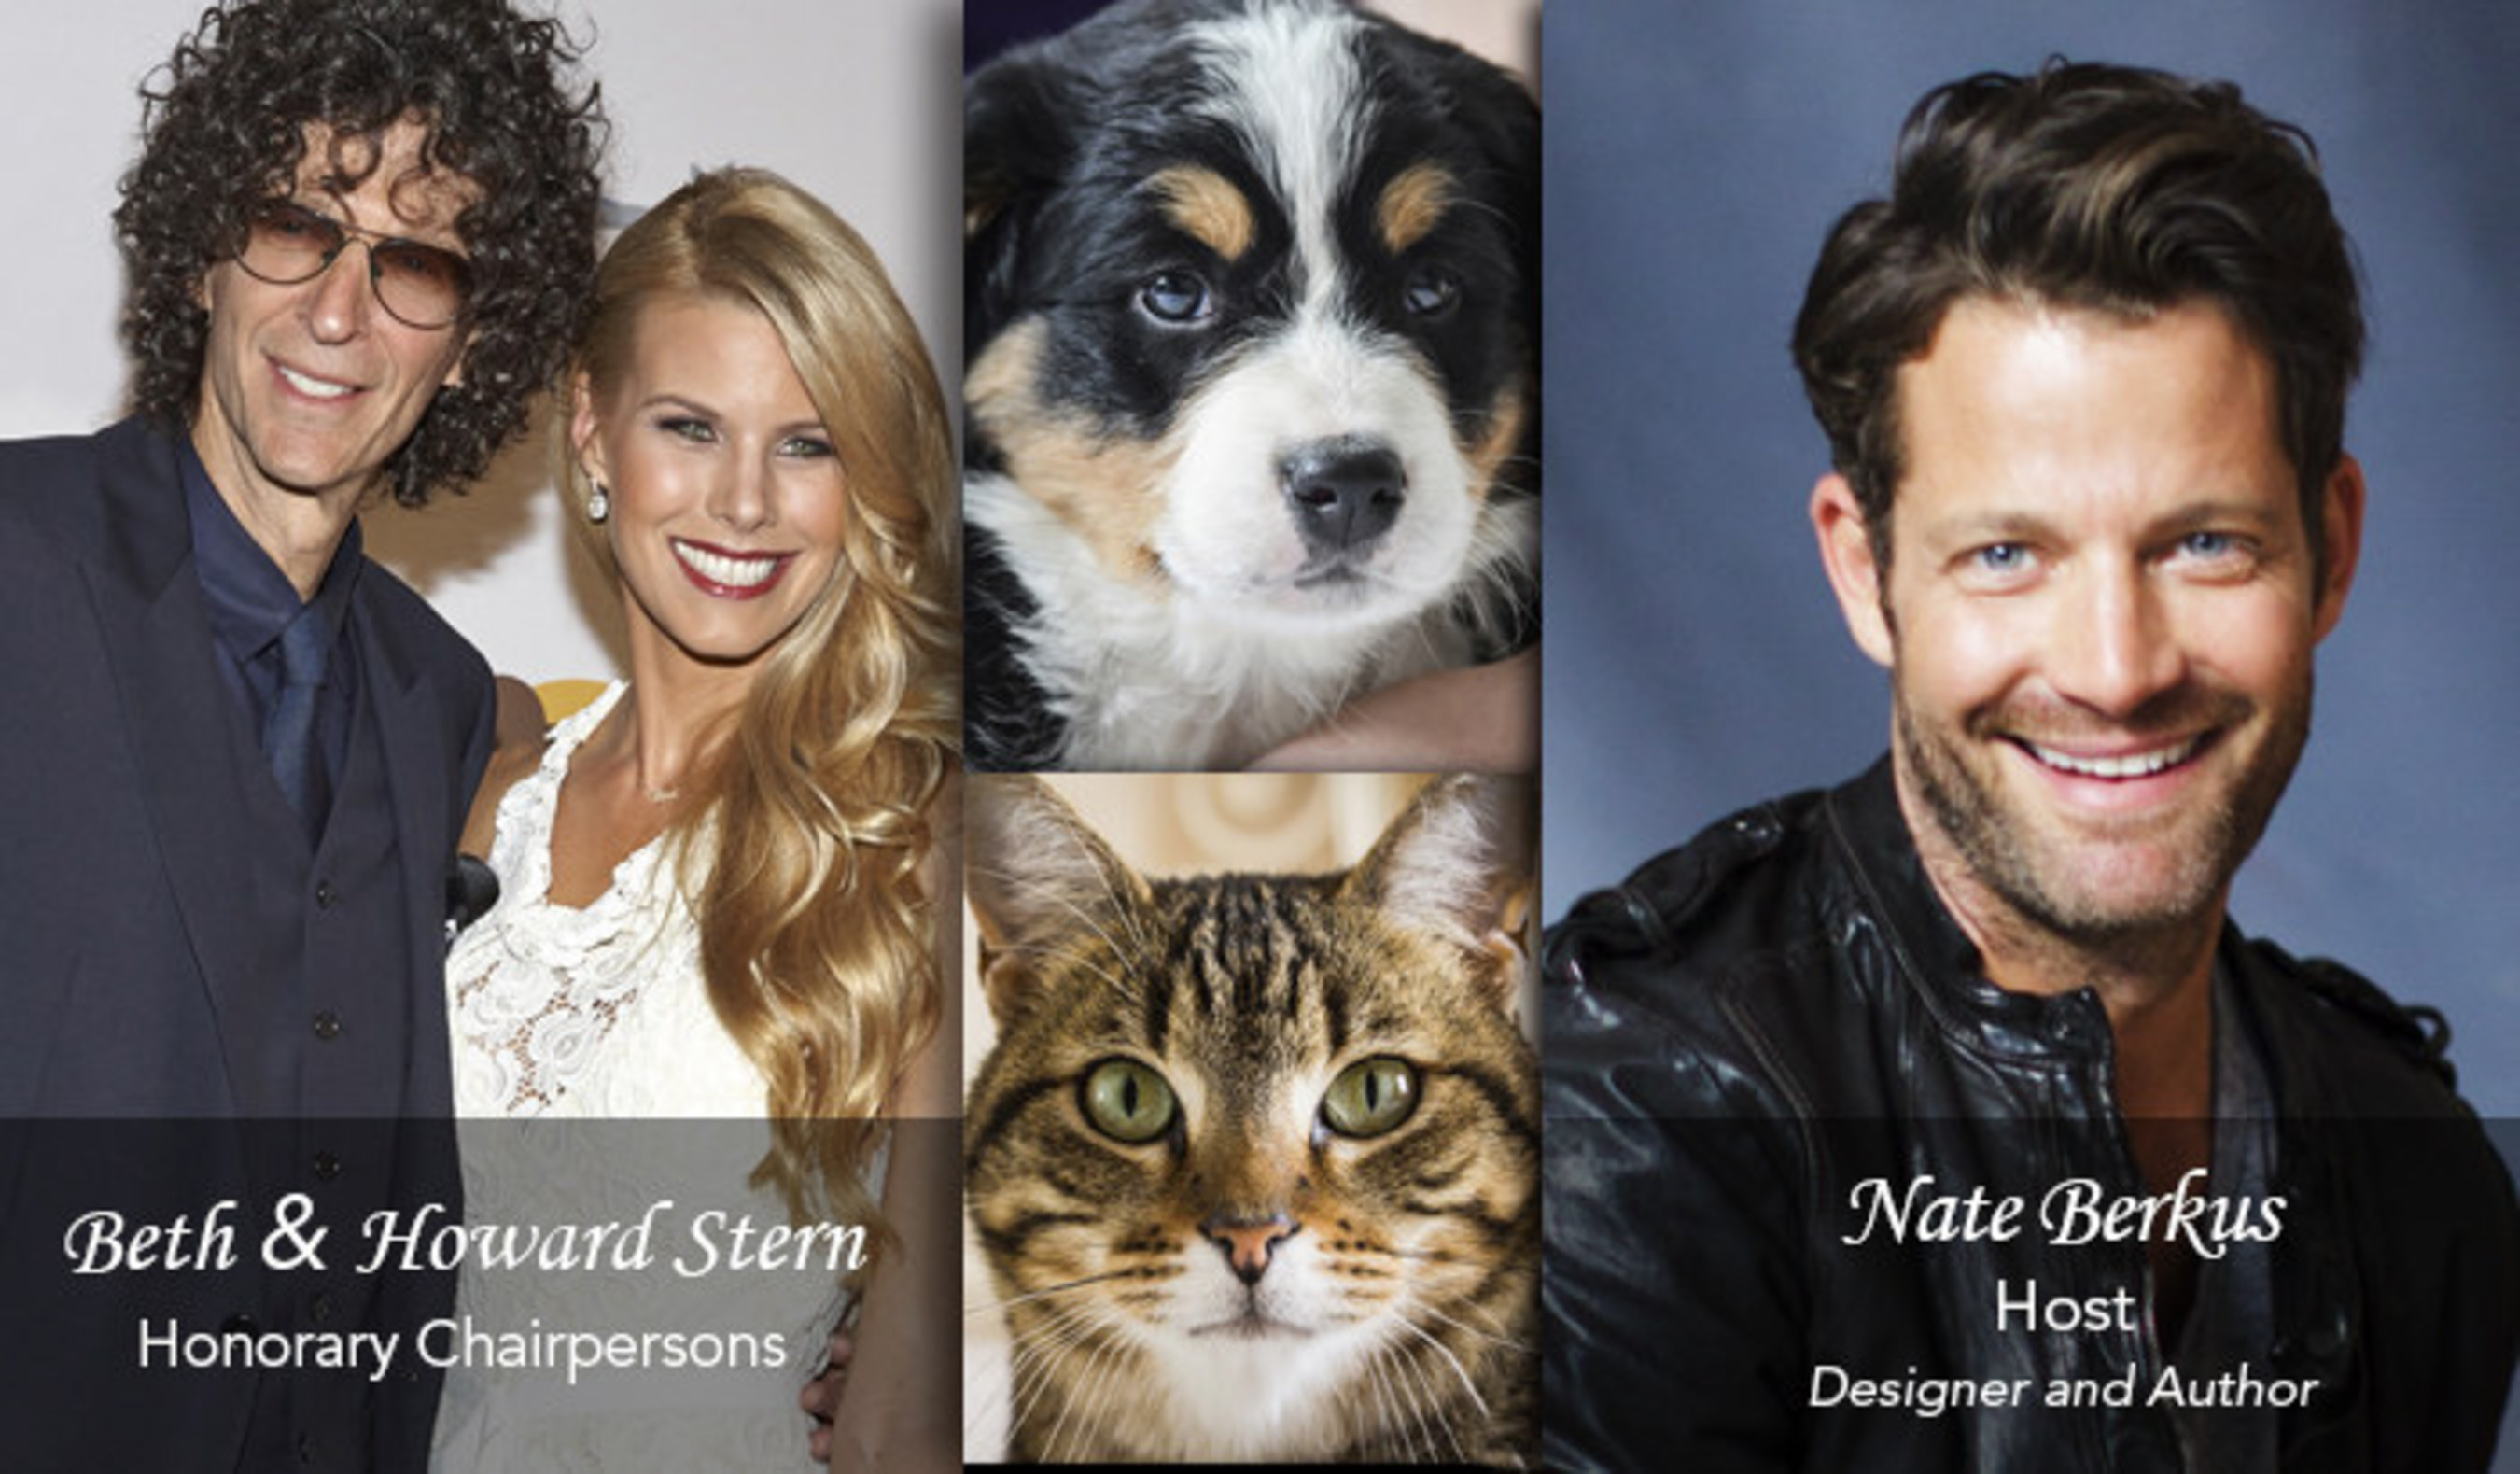 NORTH SHORE ANIMAL LEAGUE AMERICA CELEBRATES 70 YEARS OF SAVING ANIMAL LIVES - HONORARY GALA CHAIRS, BETH & HOWARD STERN - HOSTED BY DESIGNER AND AUTHOR, NATE BERKUS AT THE PLAZA HOTEL IN NYC ON FRIDAY, NOVEMBER 14TH AT 6:30PM!